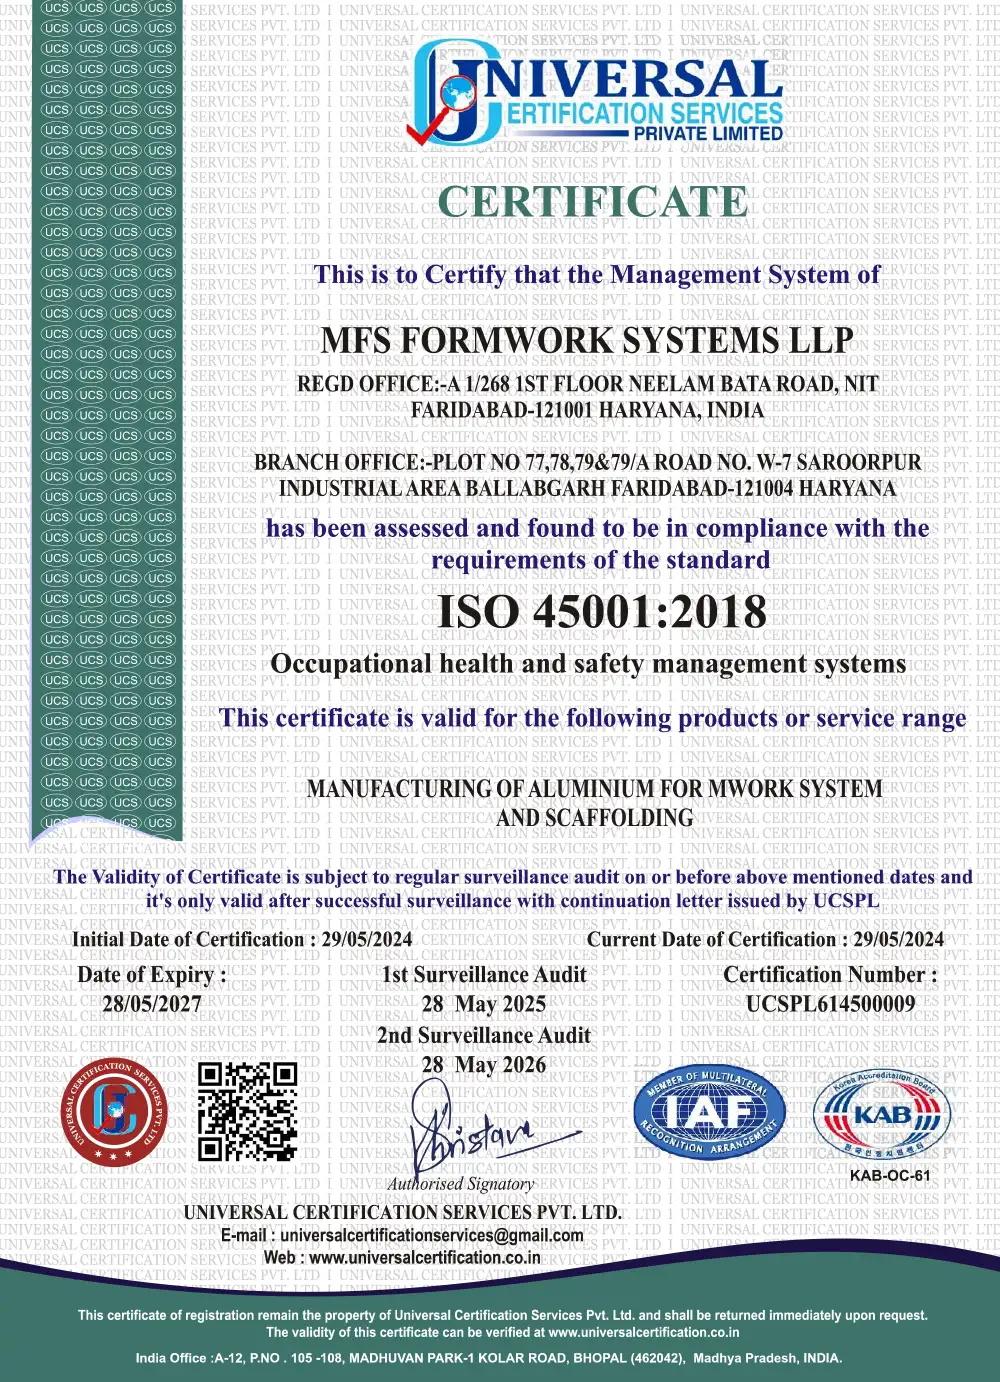 ISO 45001 -2018 Health & Safety